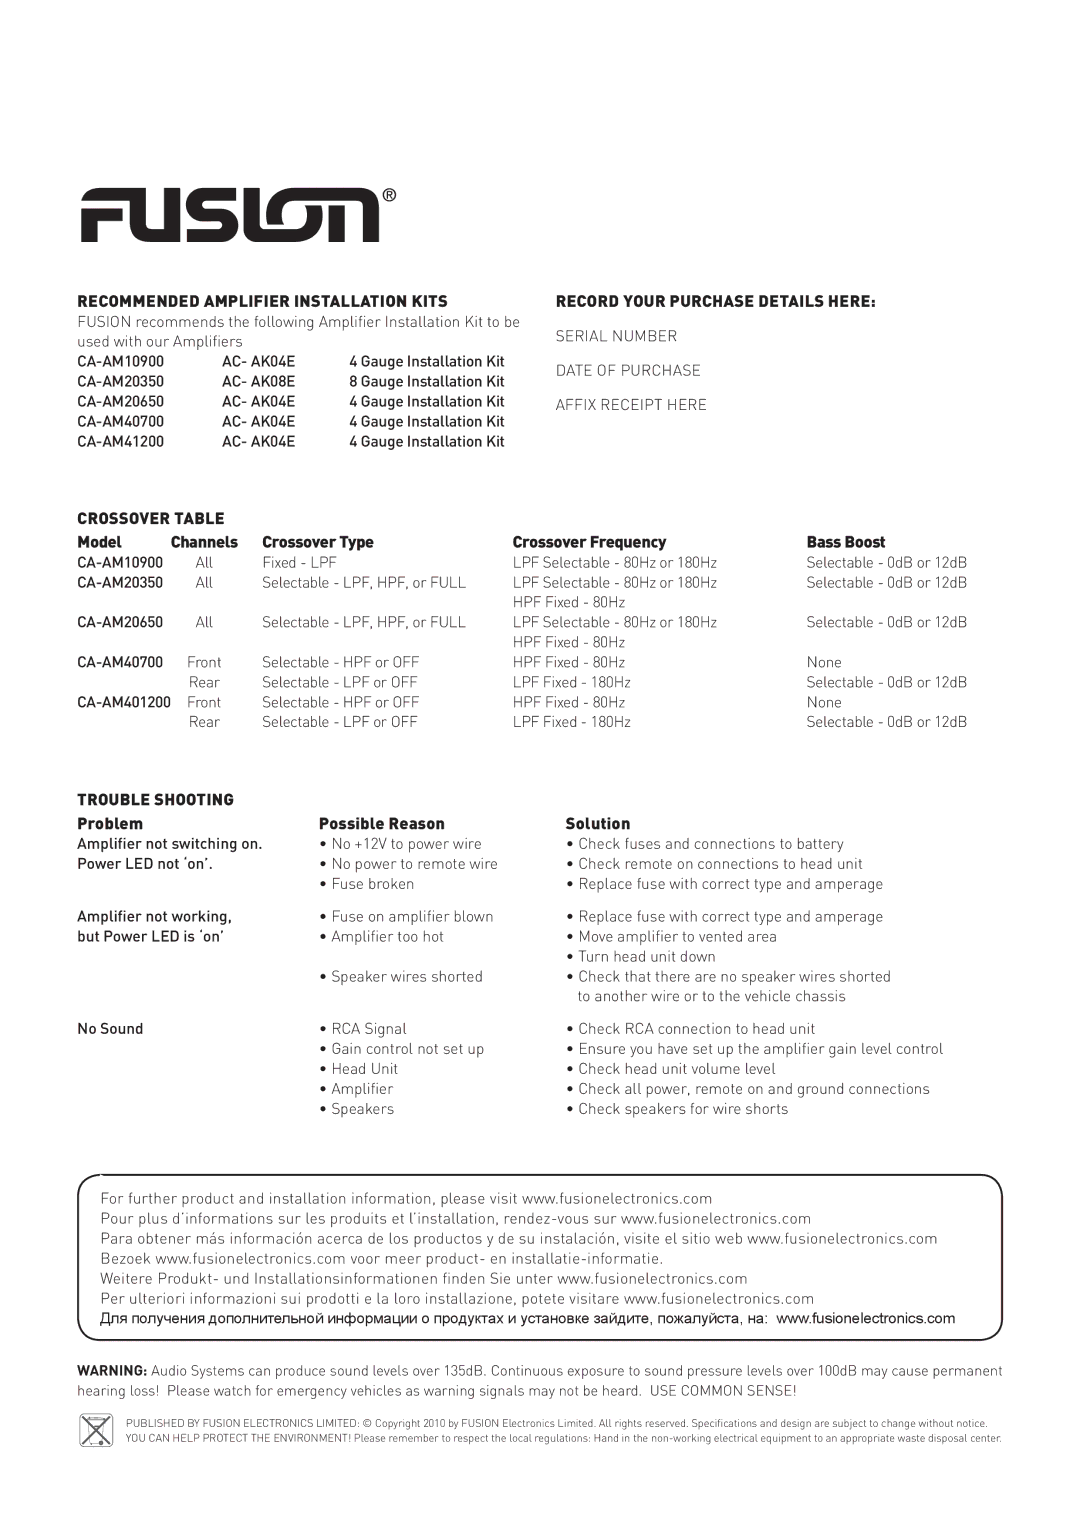 Fusion CA-AM10900, CA-AM20350 Recommended Amplifier Installation Kits, Record Your Purchase Details Here, Crossover Table 